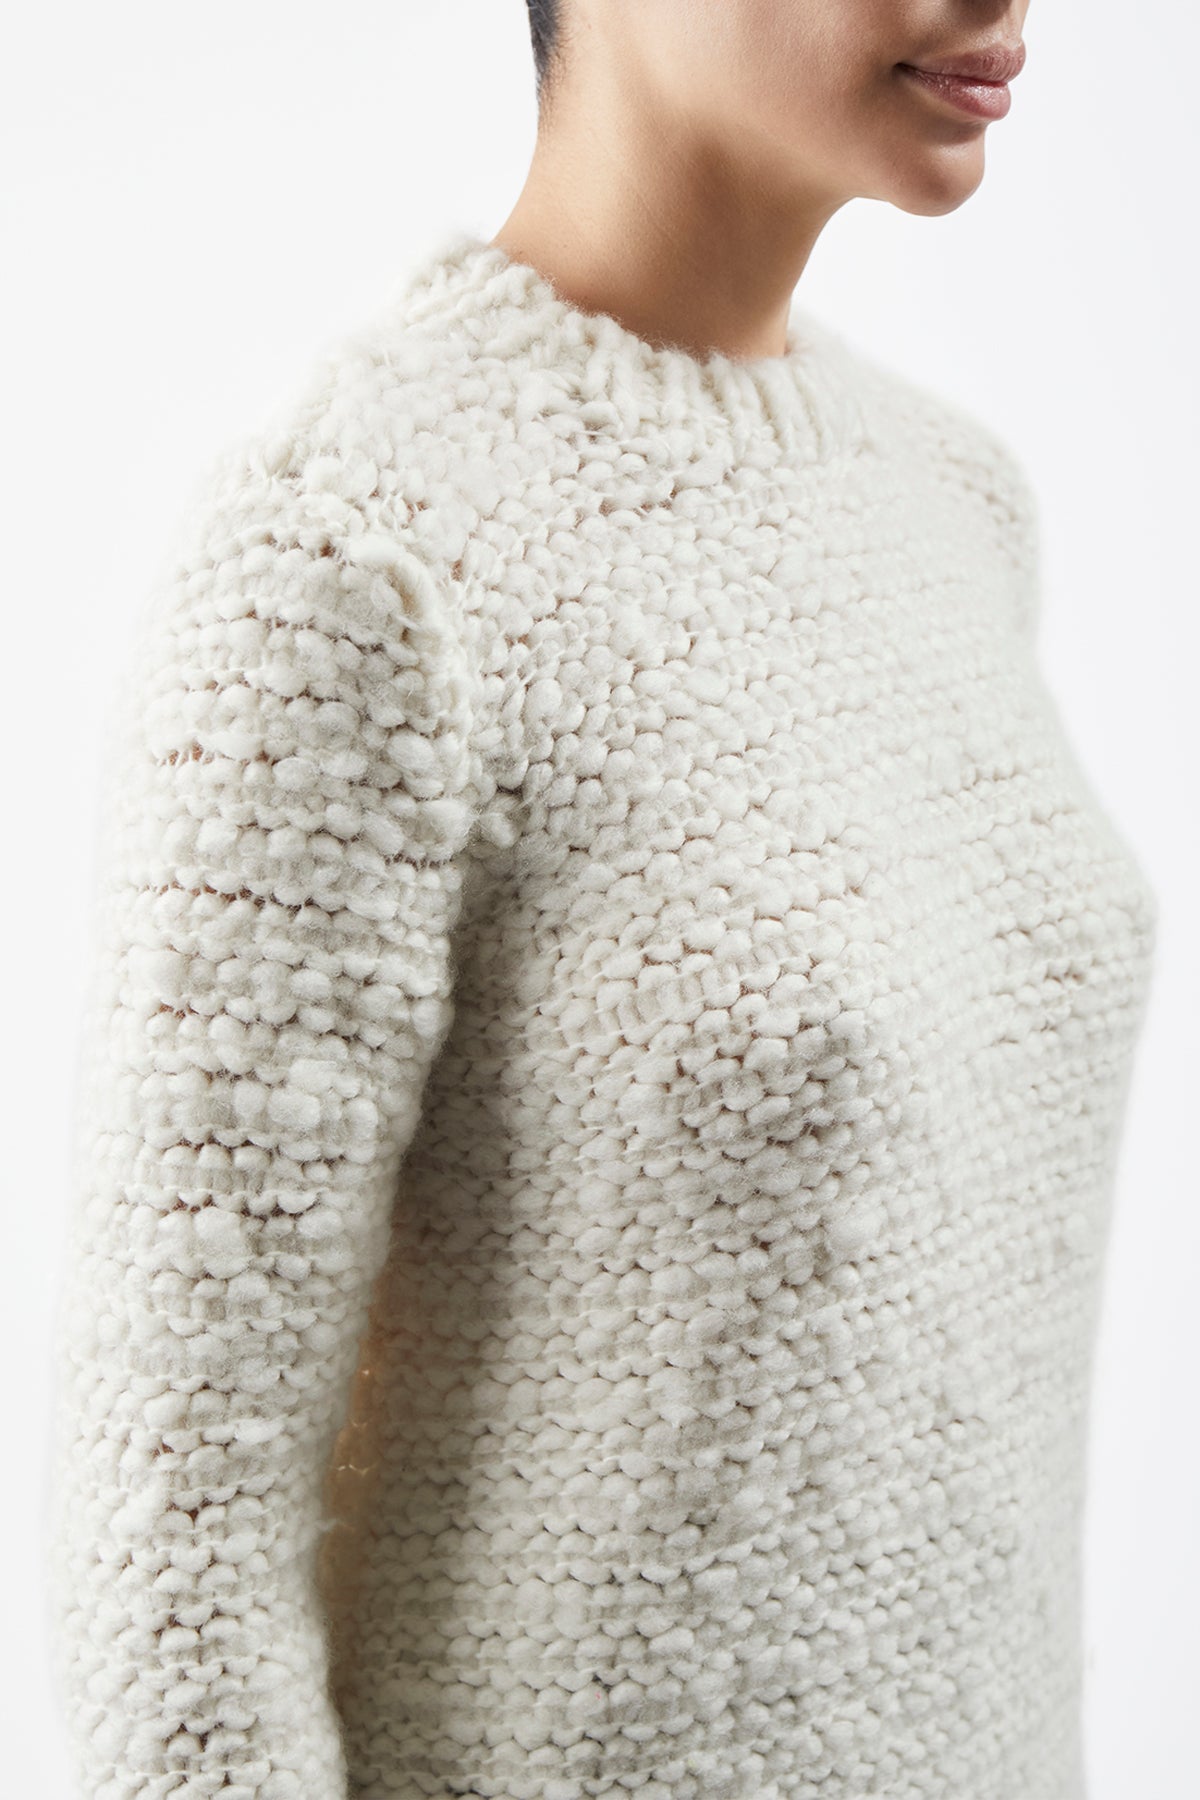 Larenzo Knit Sweater in Ivory Welfat Cashmere